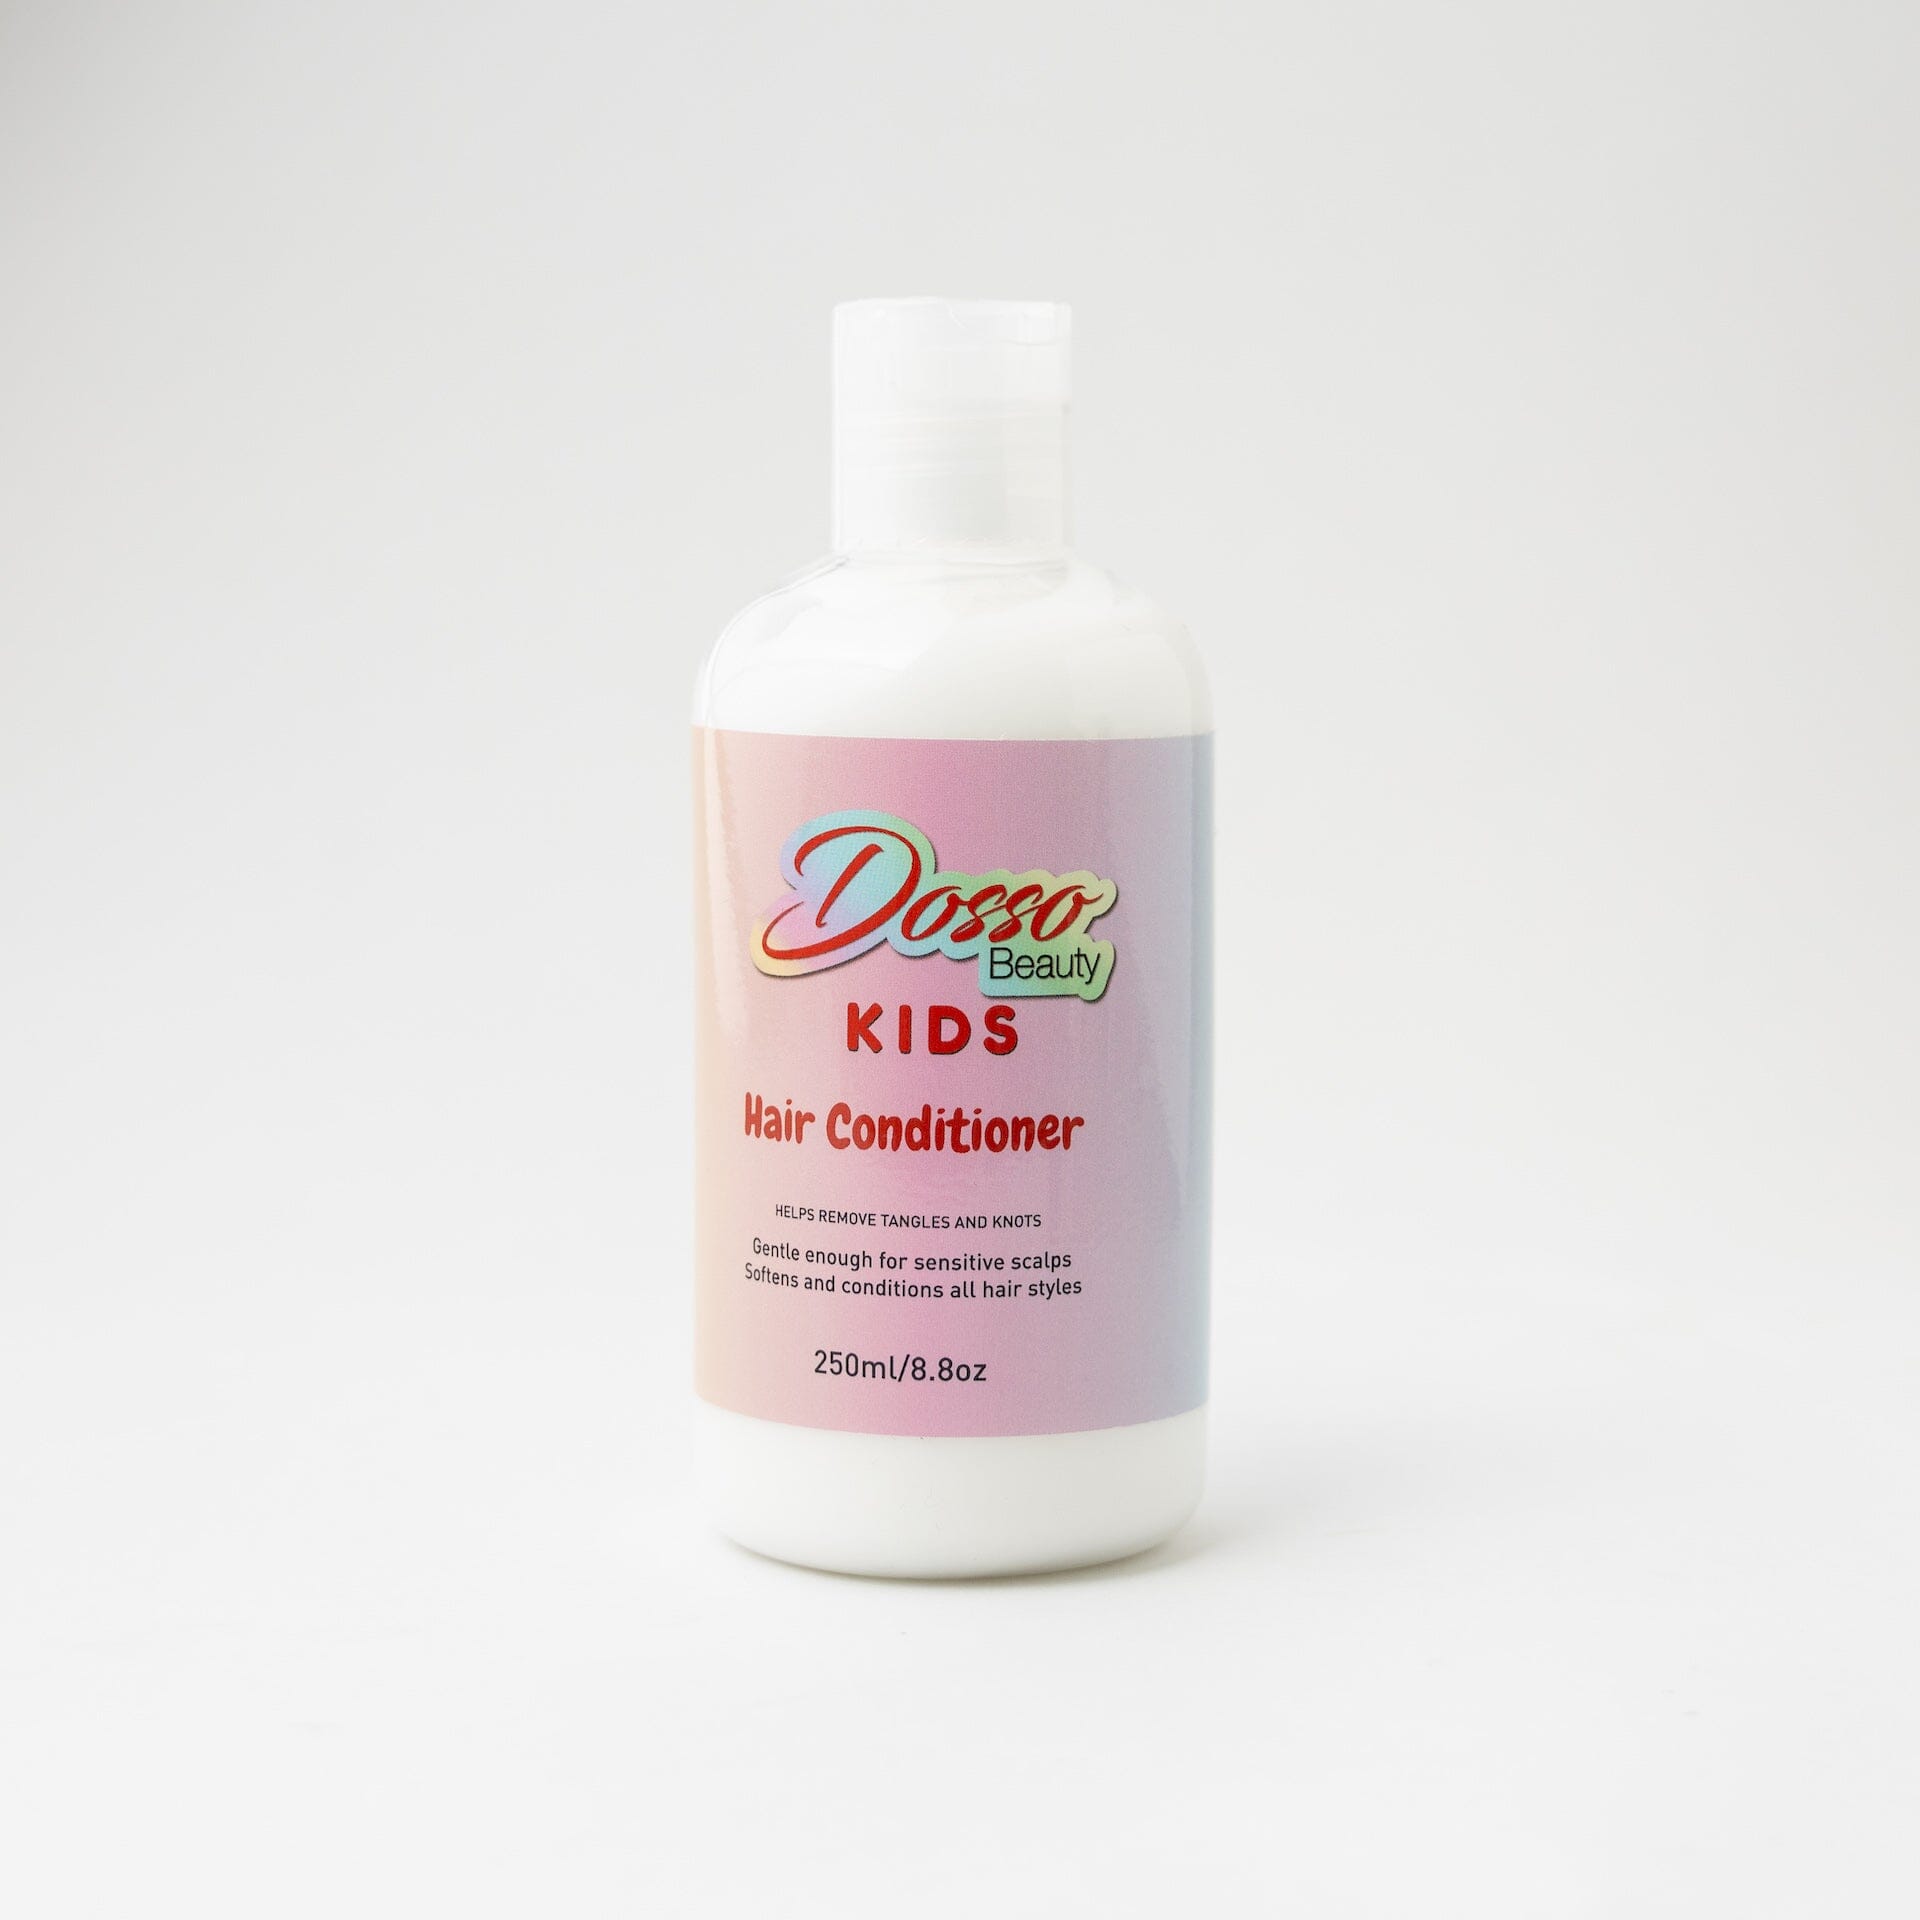 Dosso Beauty Kids Hair Conditioner